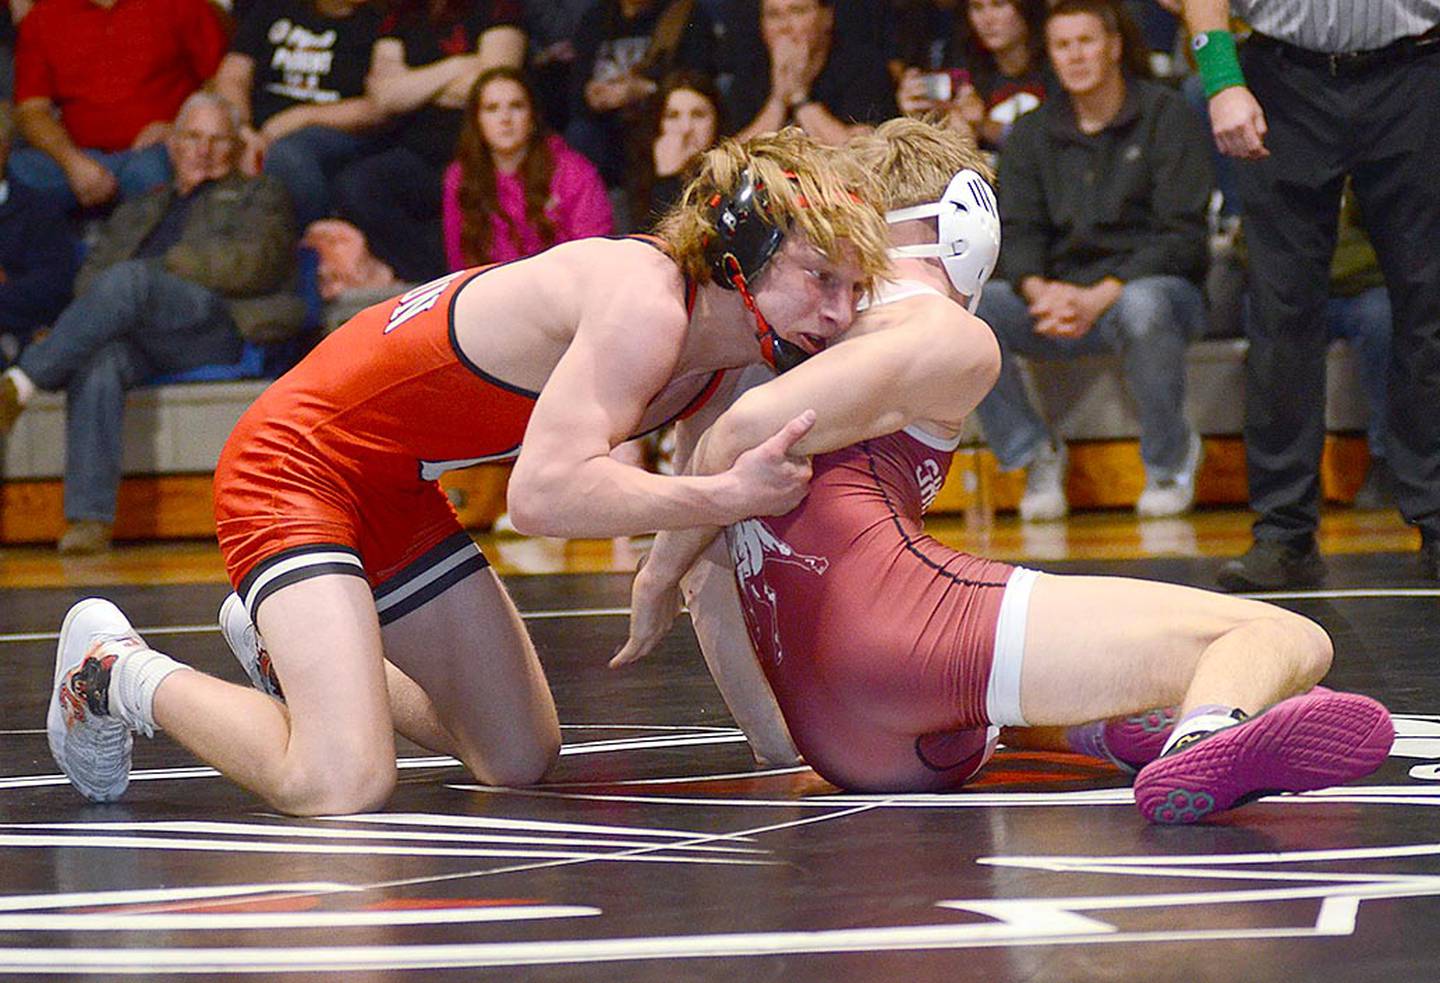 Creston 132-pounder Lincoln Keeler controls Hayden Roush of Shenandoah during his 7-5 victory. It was Keeler's 100th career victory.